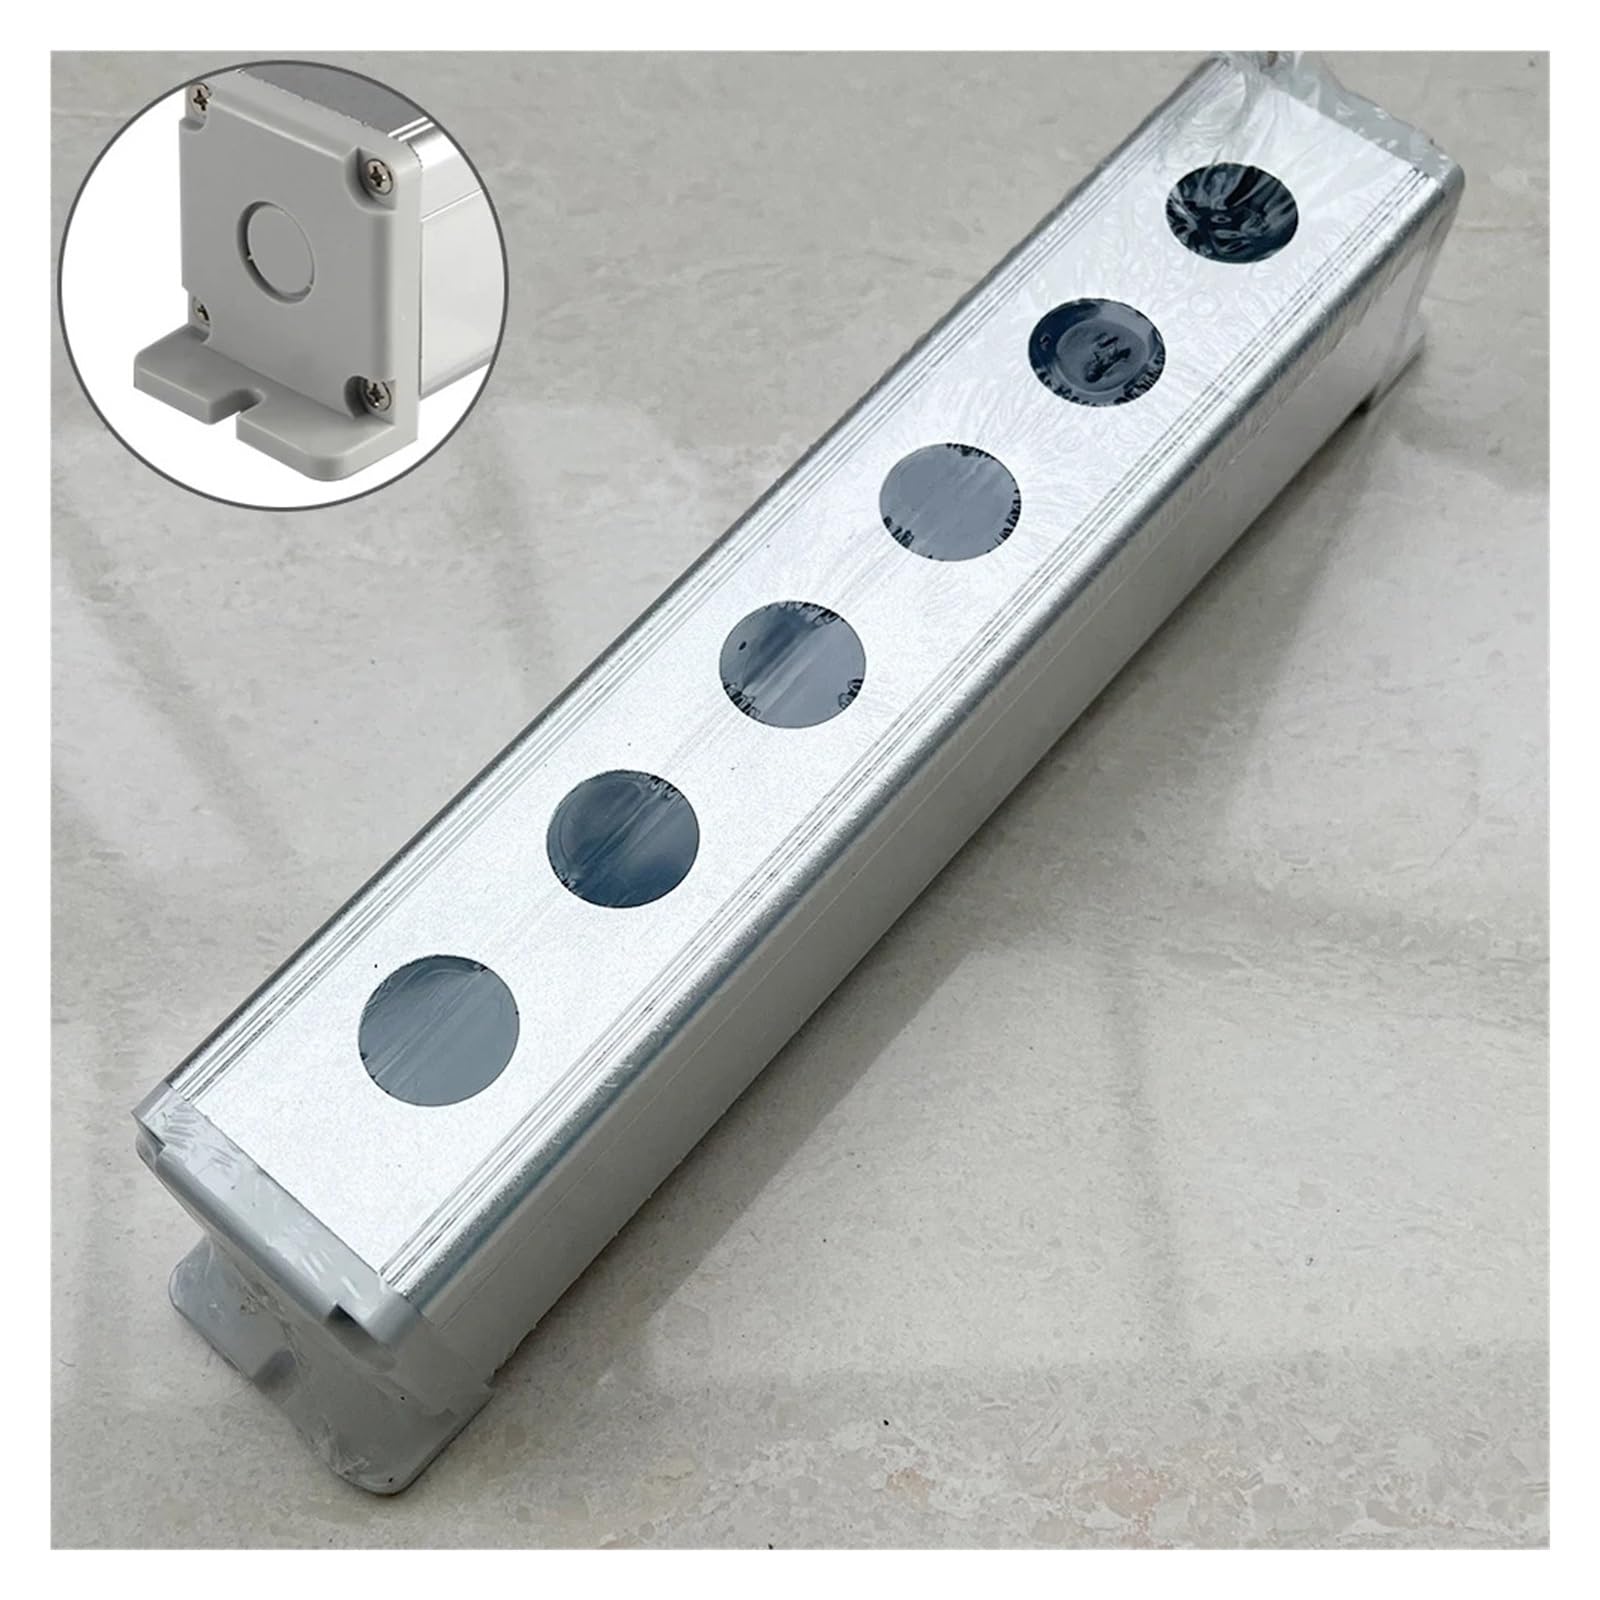 16mm 19mm 22mm Waterproof Aluminium Push Button Switch Box for Metal Buttons Industrial Control Equipment 1 2 3 4 5 6 Hole ZMBMNNWQ(6 Hole With Ear,22MM) von ZMBMNNWQ